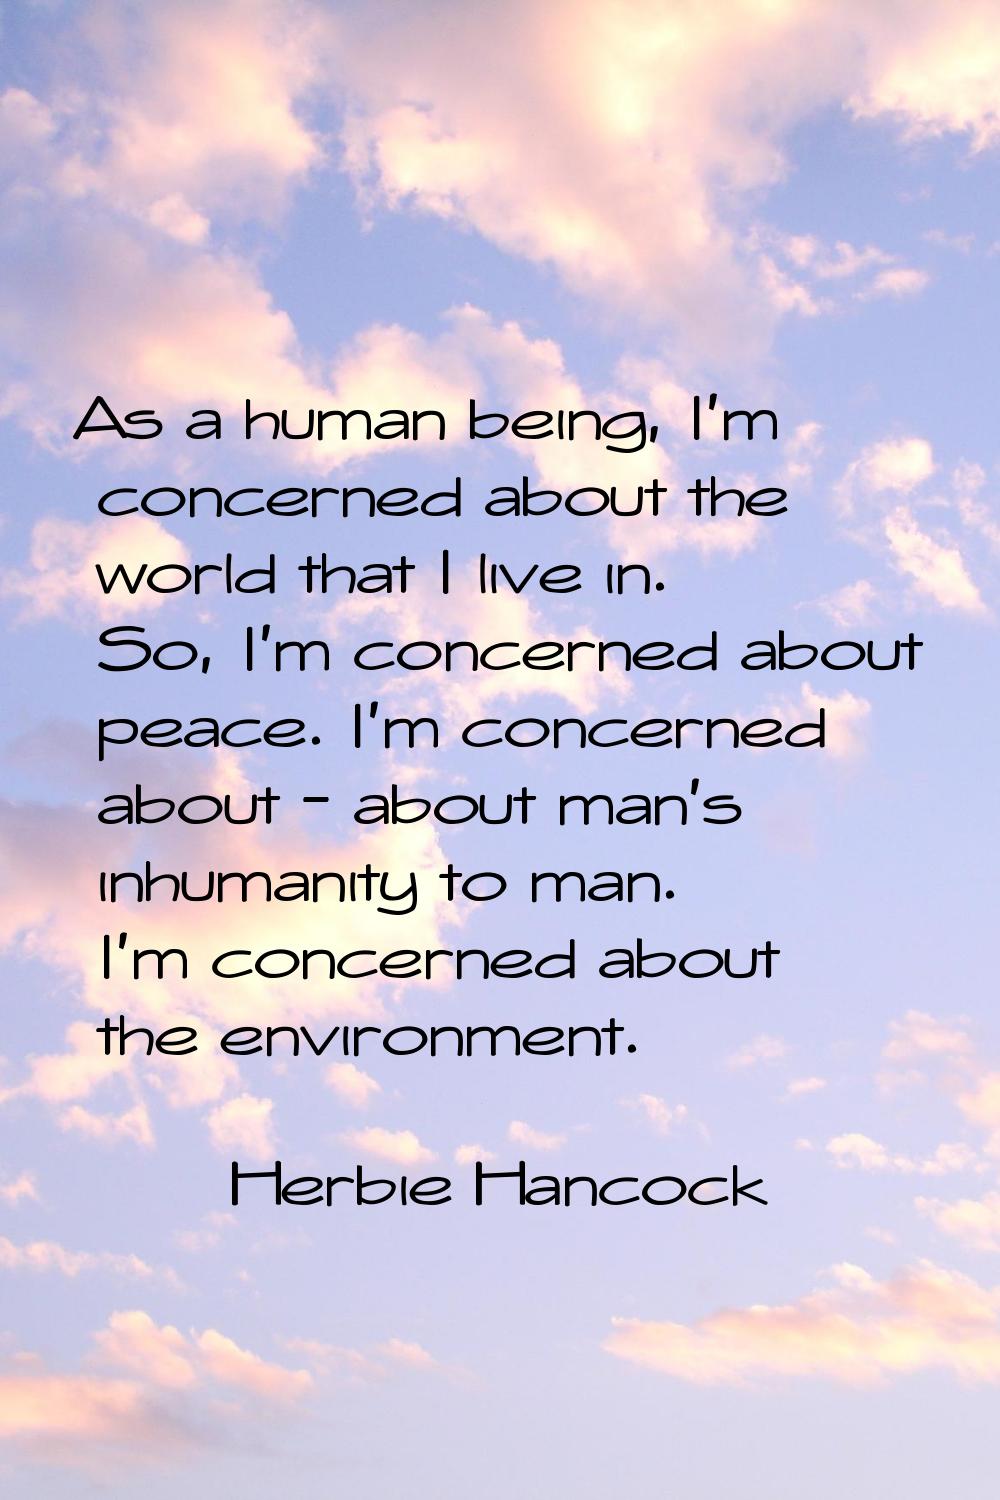 As a human being, I'm concerned about the world that I live in. So, I'm concerned about peace. I'm 